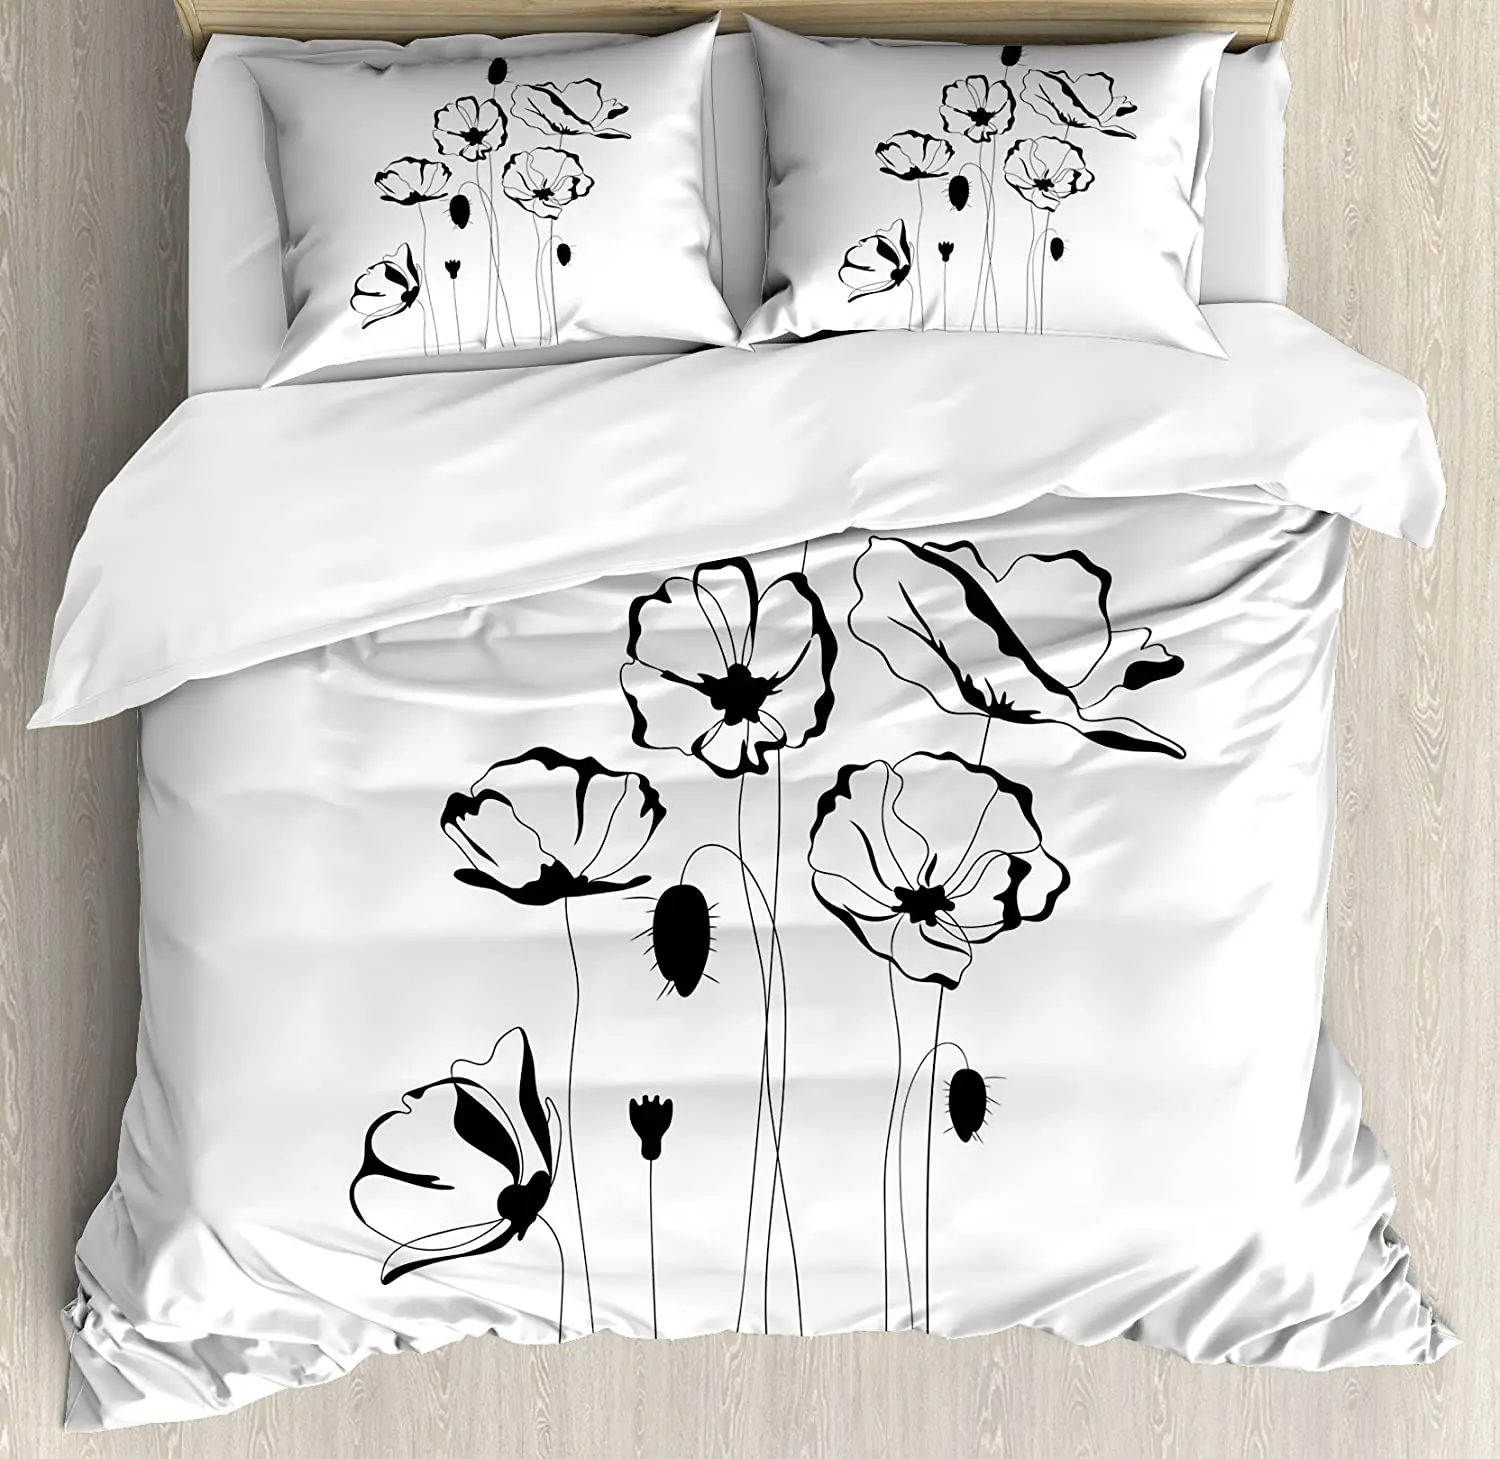 

Poppy Bedding Set For Bedroom Bed Home Monochrome Herbs with Buds on Skinny Stems Artistic Duvet Cover Quilt Cover Pillowcase